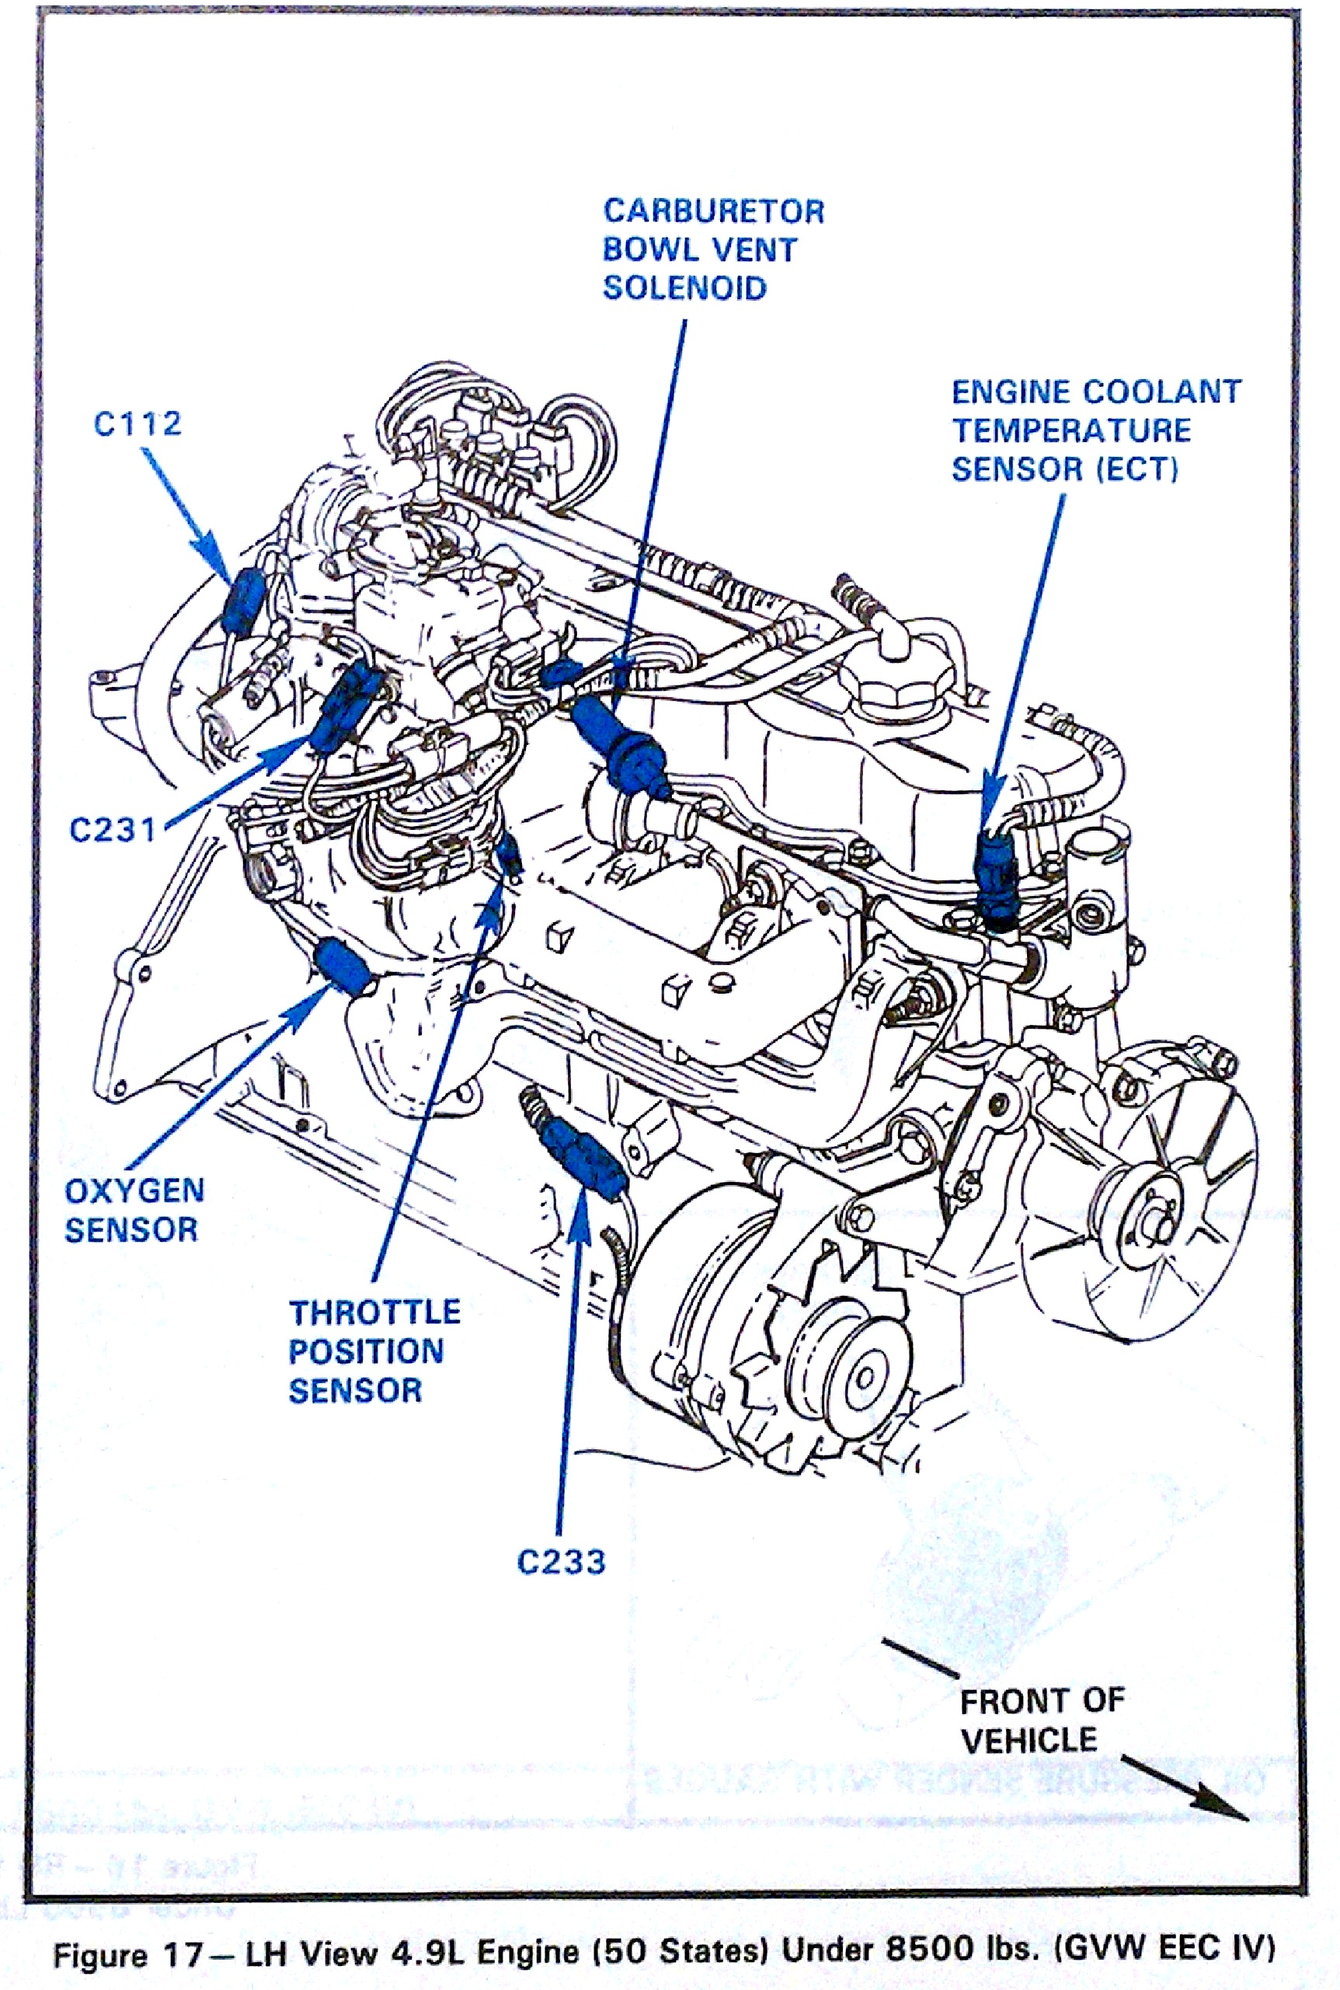 1985 ford f150 300 inline 6 smog help - Ford Truck ... 1985 ford f 250 ignition wiring diagram 